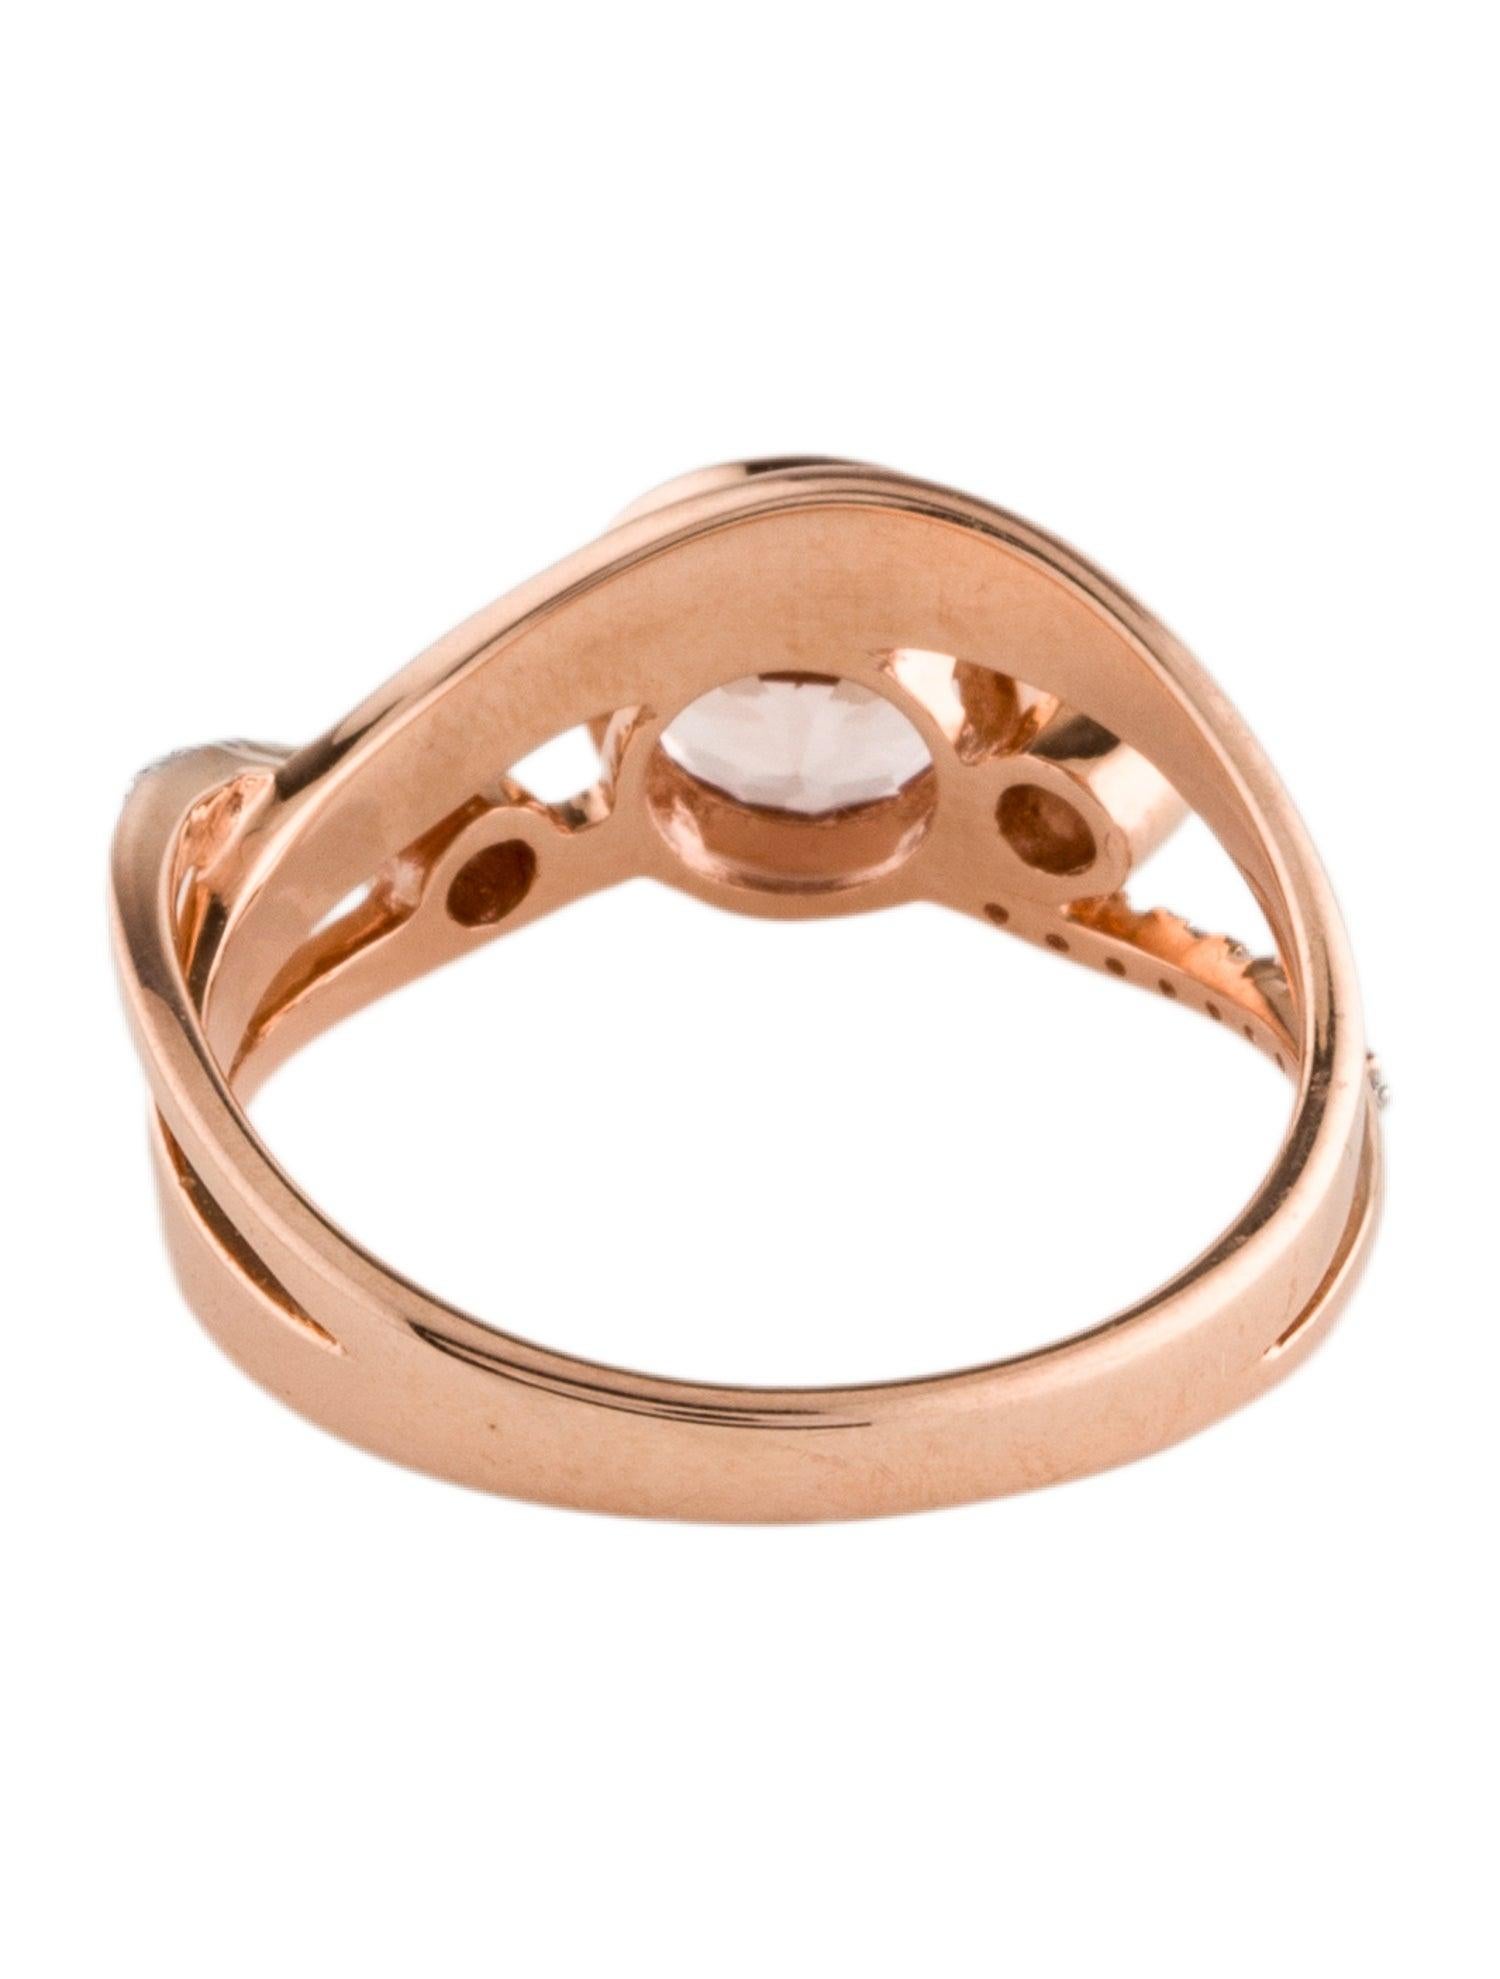 Elegant 14K Rose Gold Morganite & Diamond Cocktail Ring, 1.38ctw, Size 7.5 In New Condition For Sale In Holtsville, NY